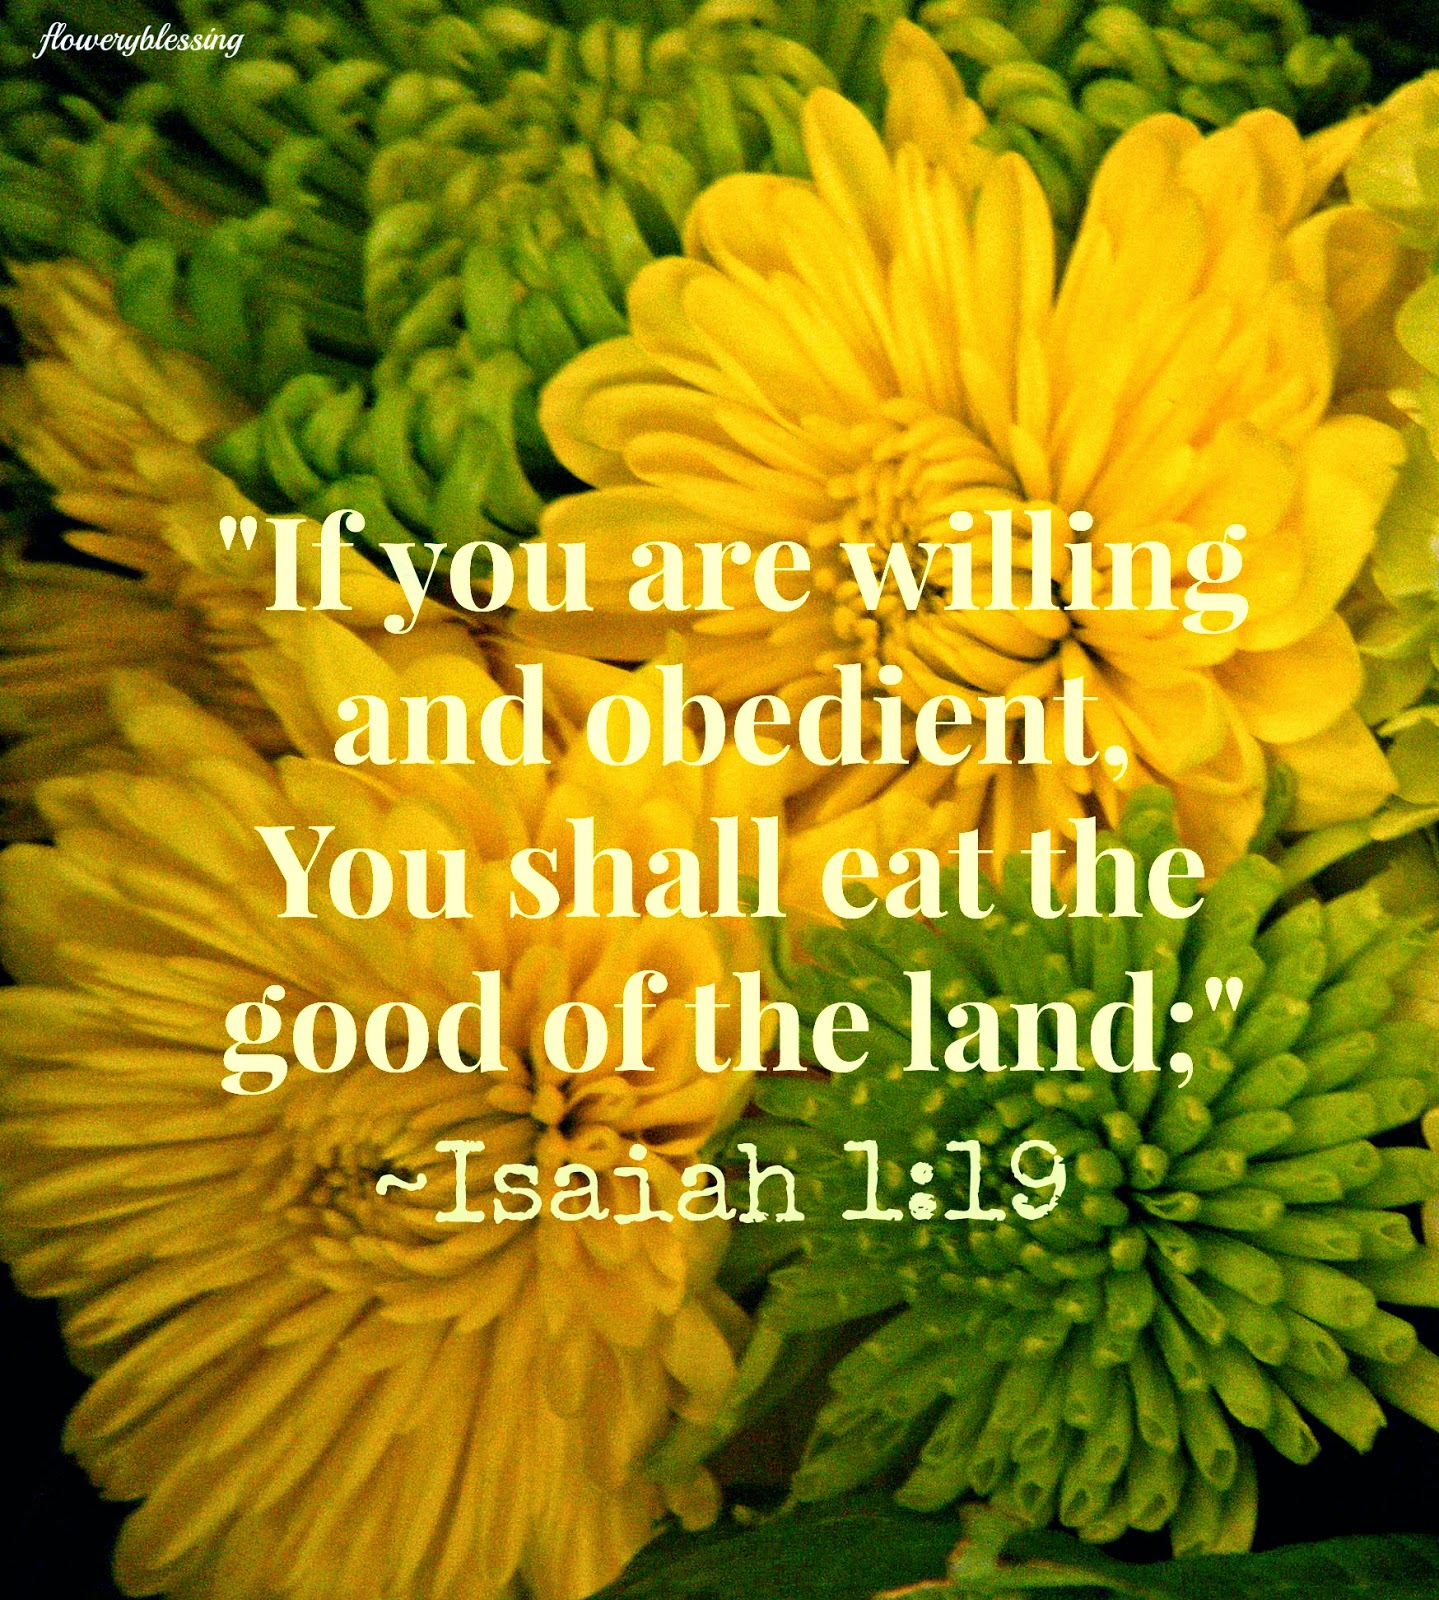 Flowery Blessing "If you are willing and obedient, You